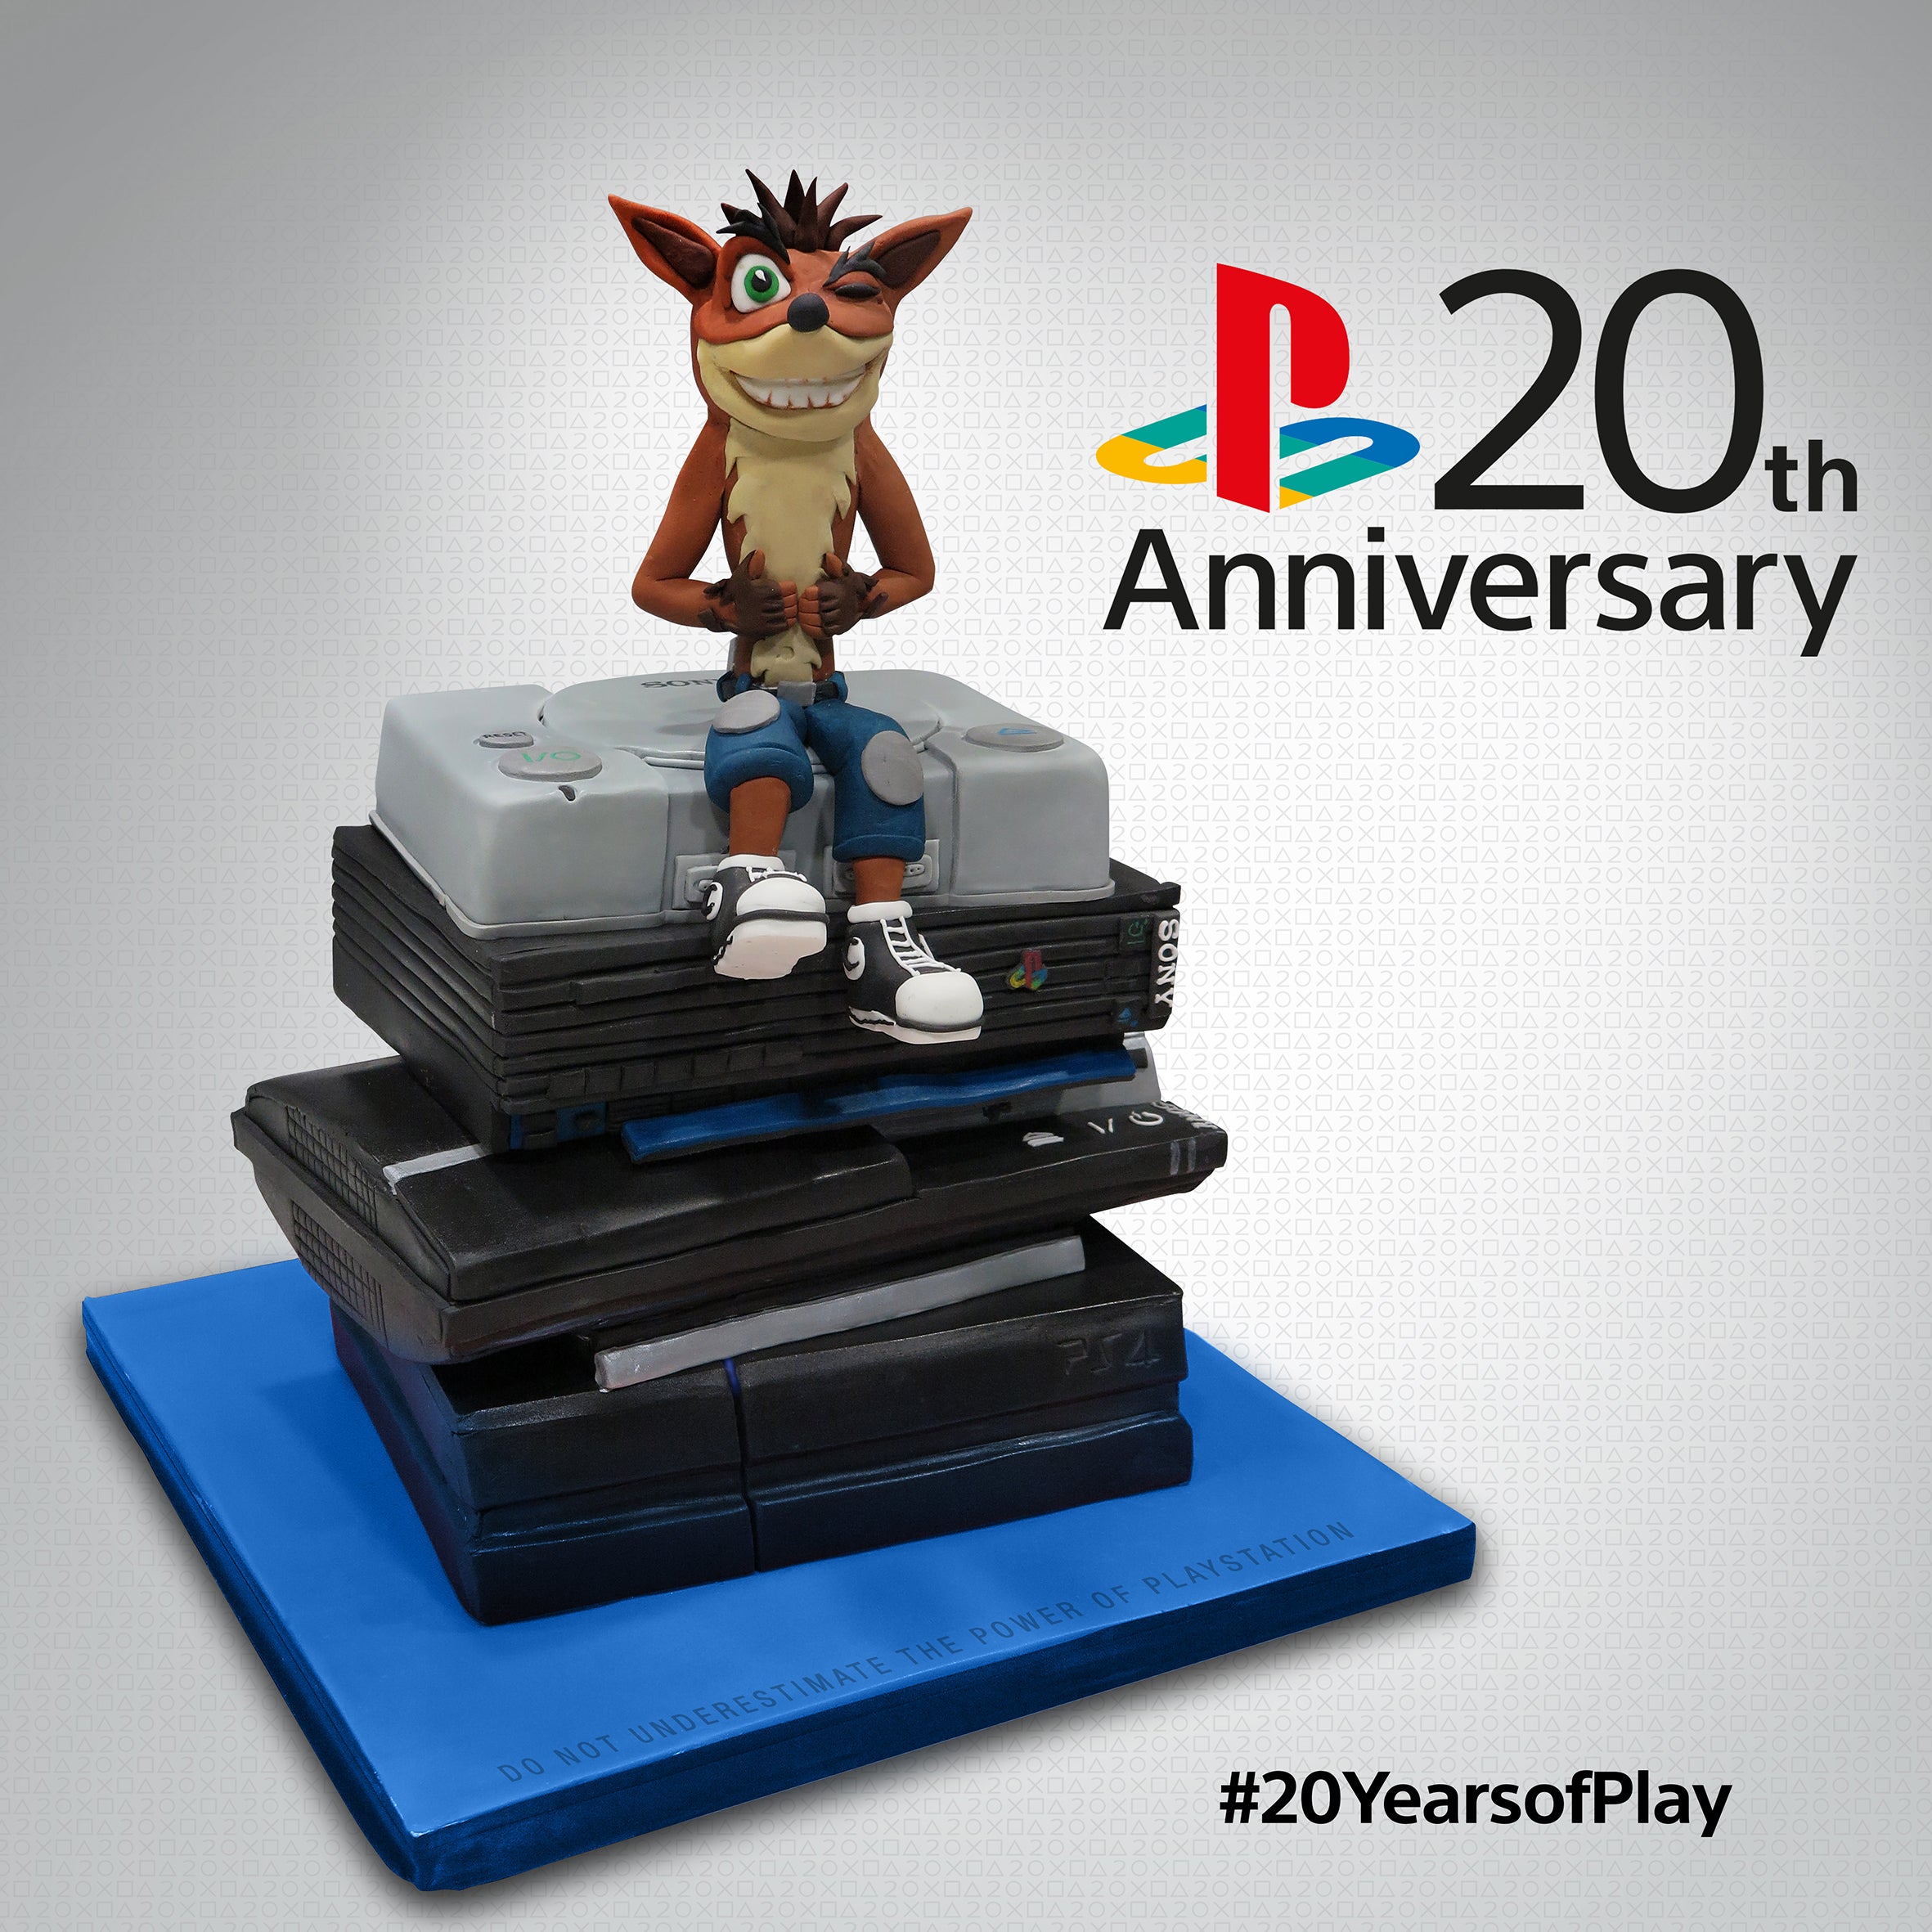 Image for PlayStation One turns 20 years old in Europe, Sony giving away 20th Anniversary PS4